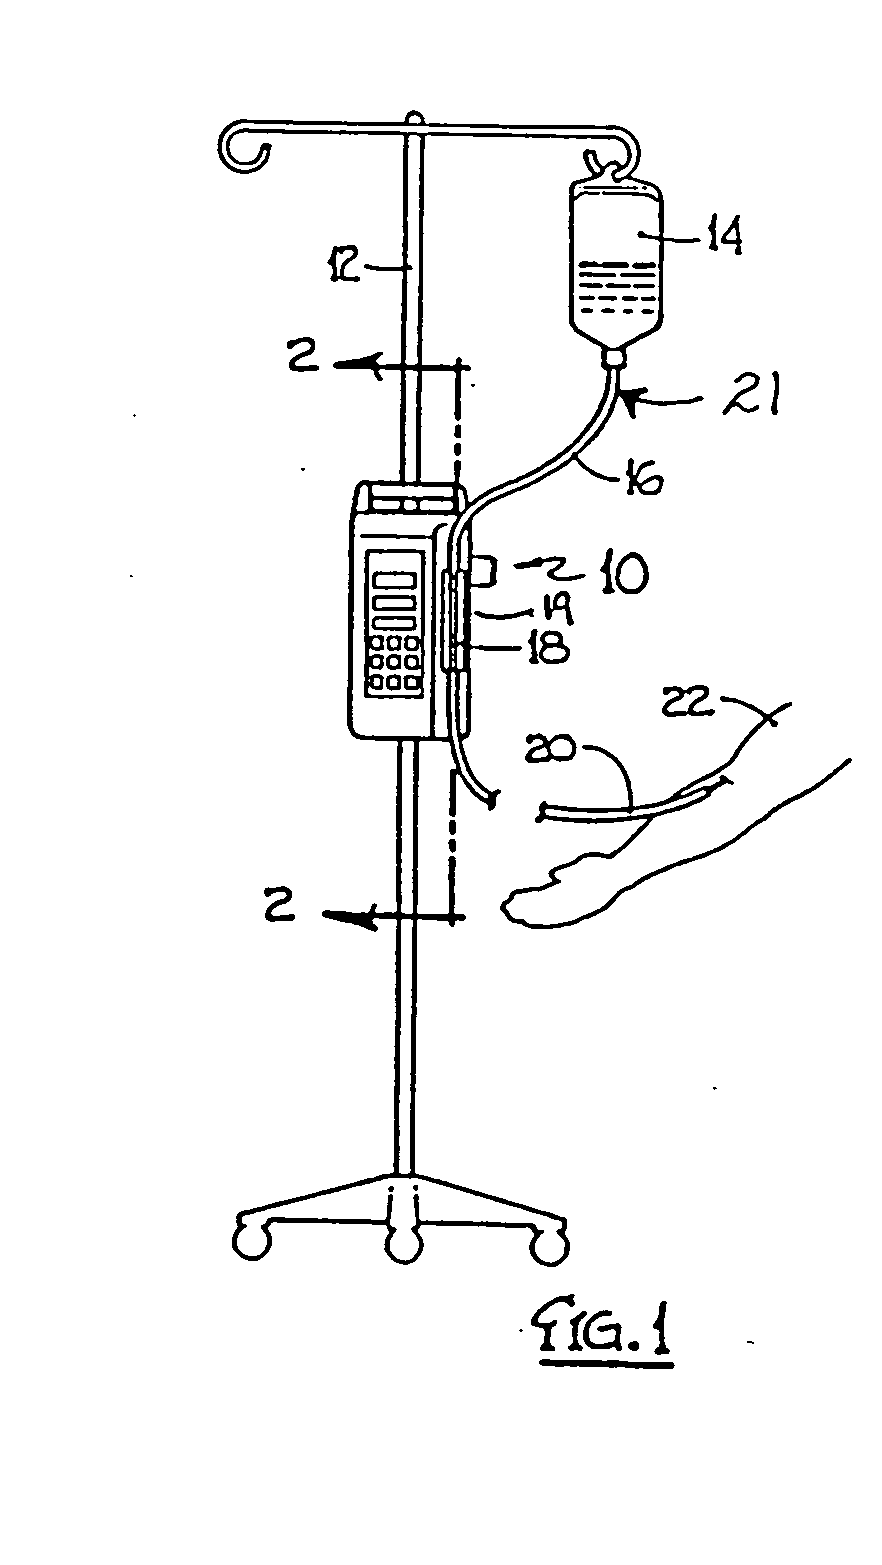 System for detecting the status of a vent associated with a fluid supply upstream of an infusion pump